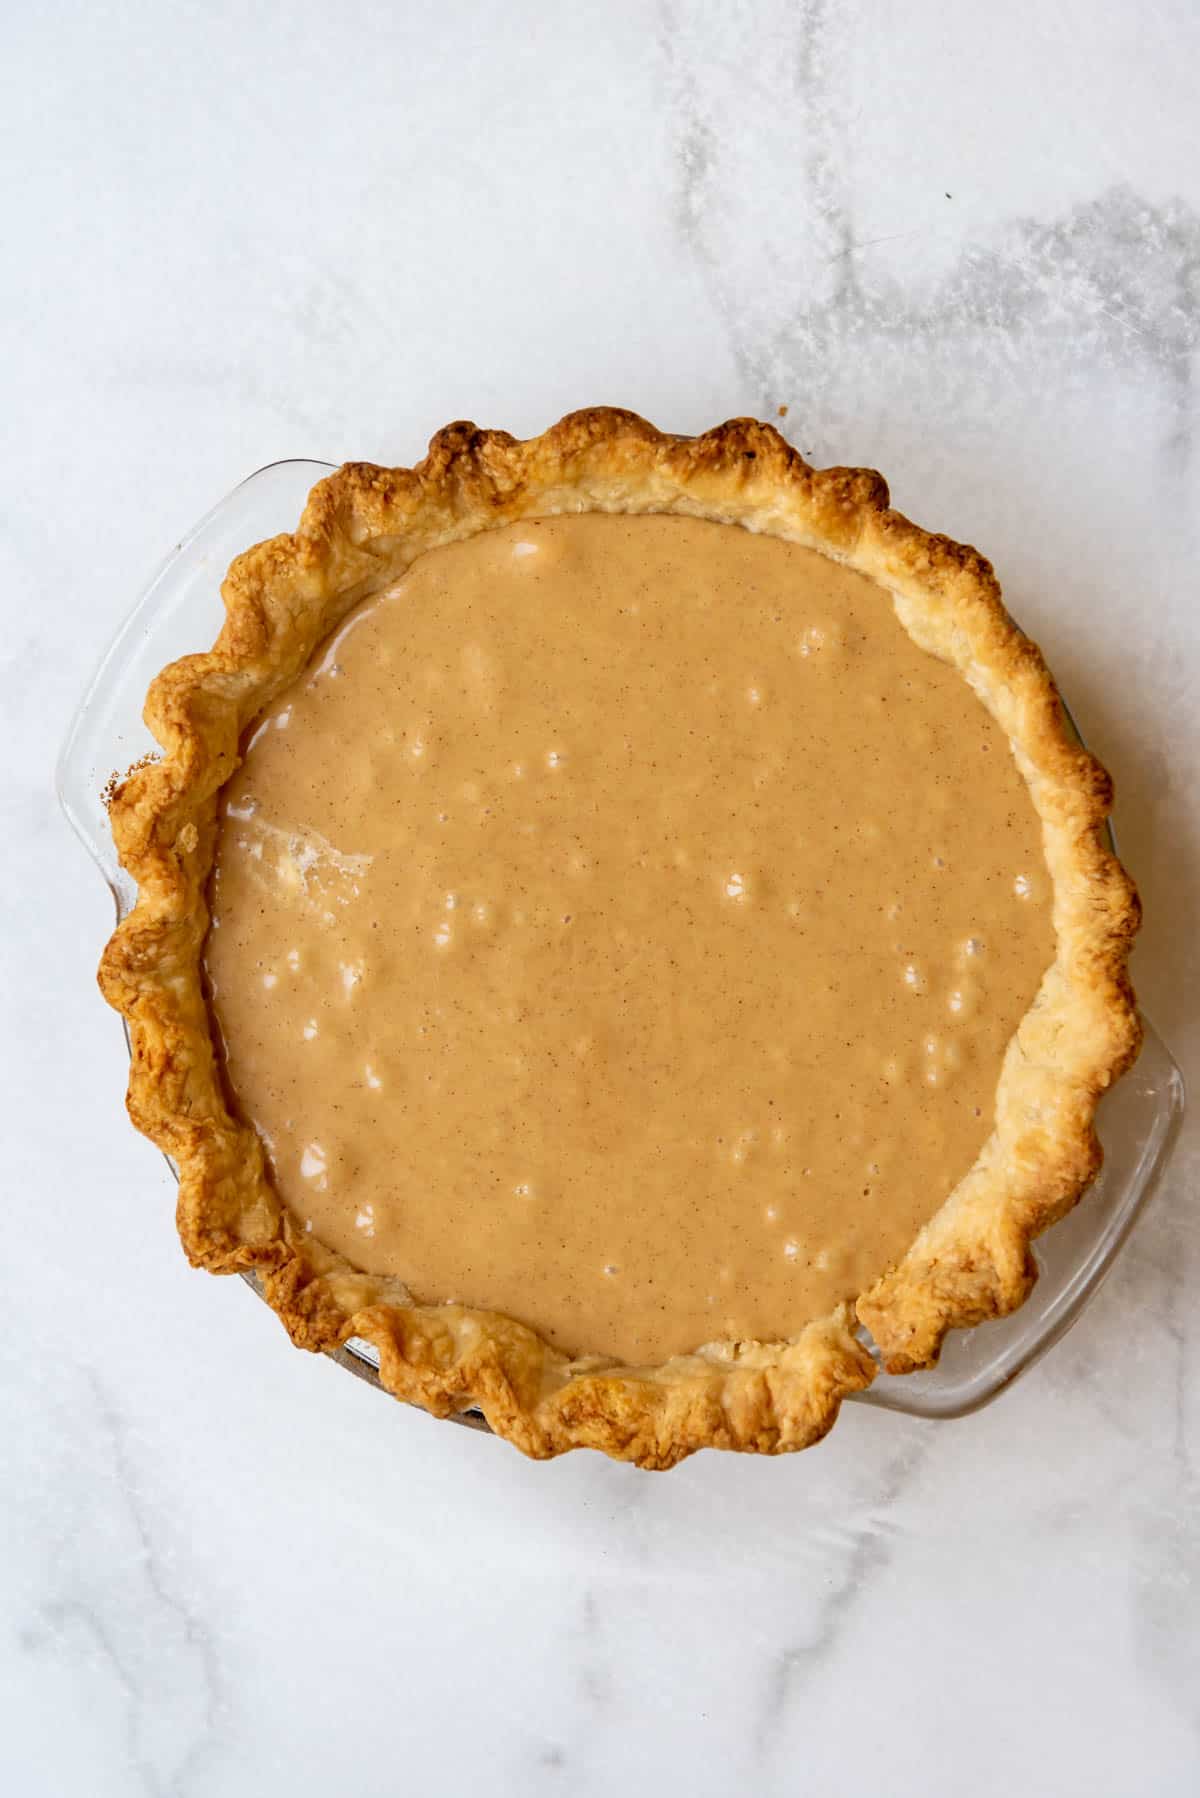 Peanut butter nougat filling in a baked pie crust.